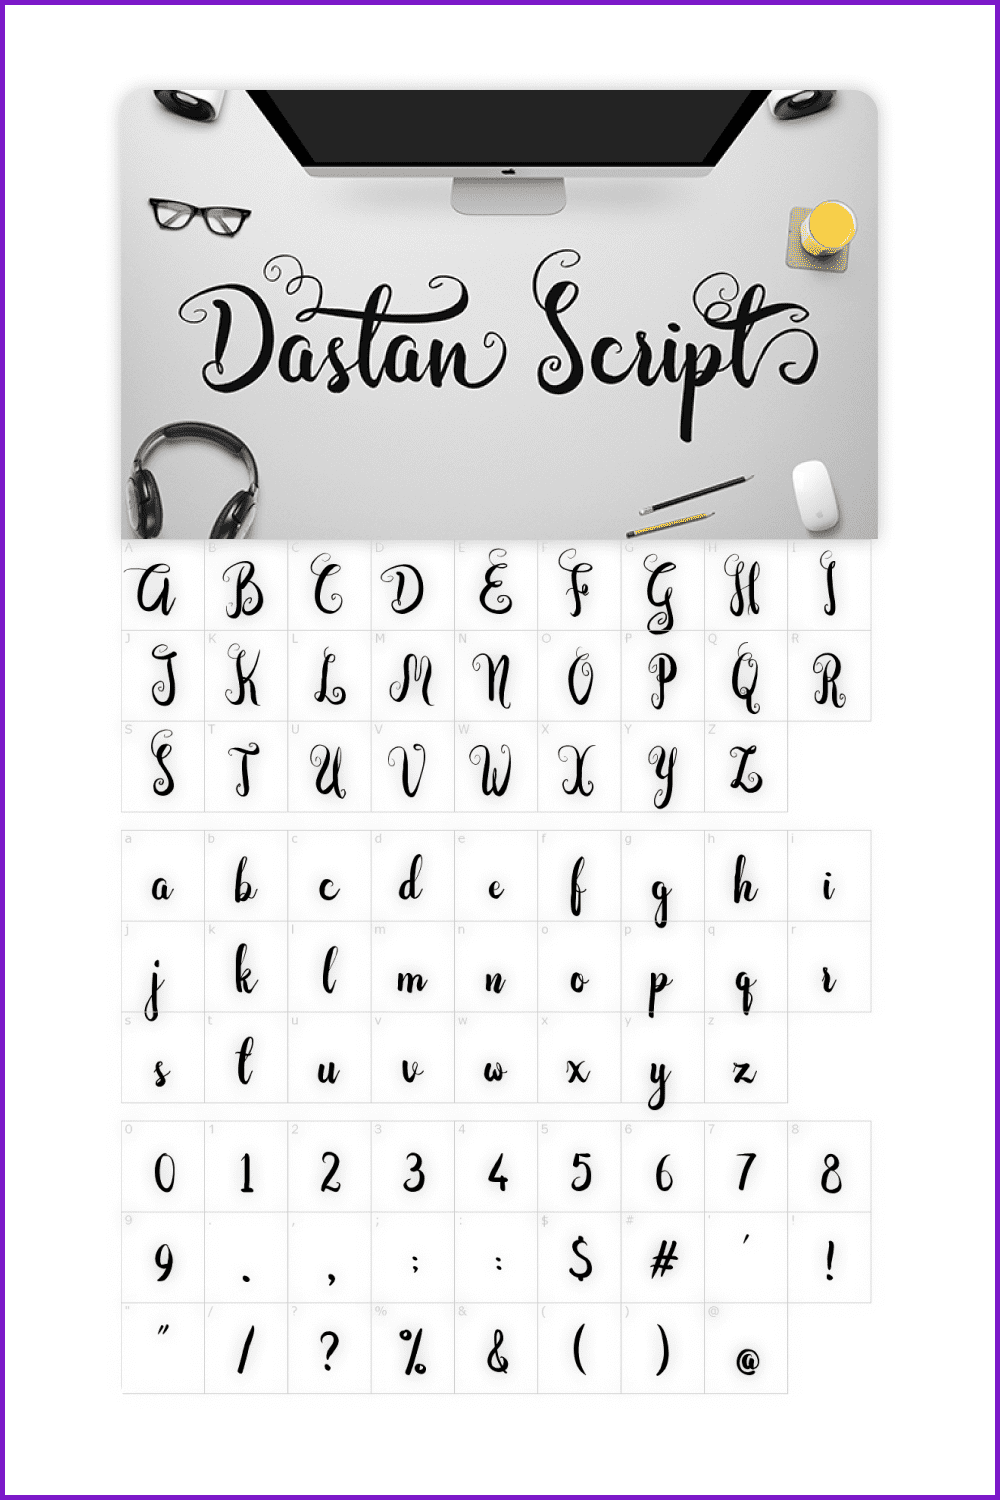 Image of each letter of Dastan font separately.